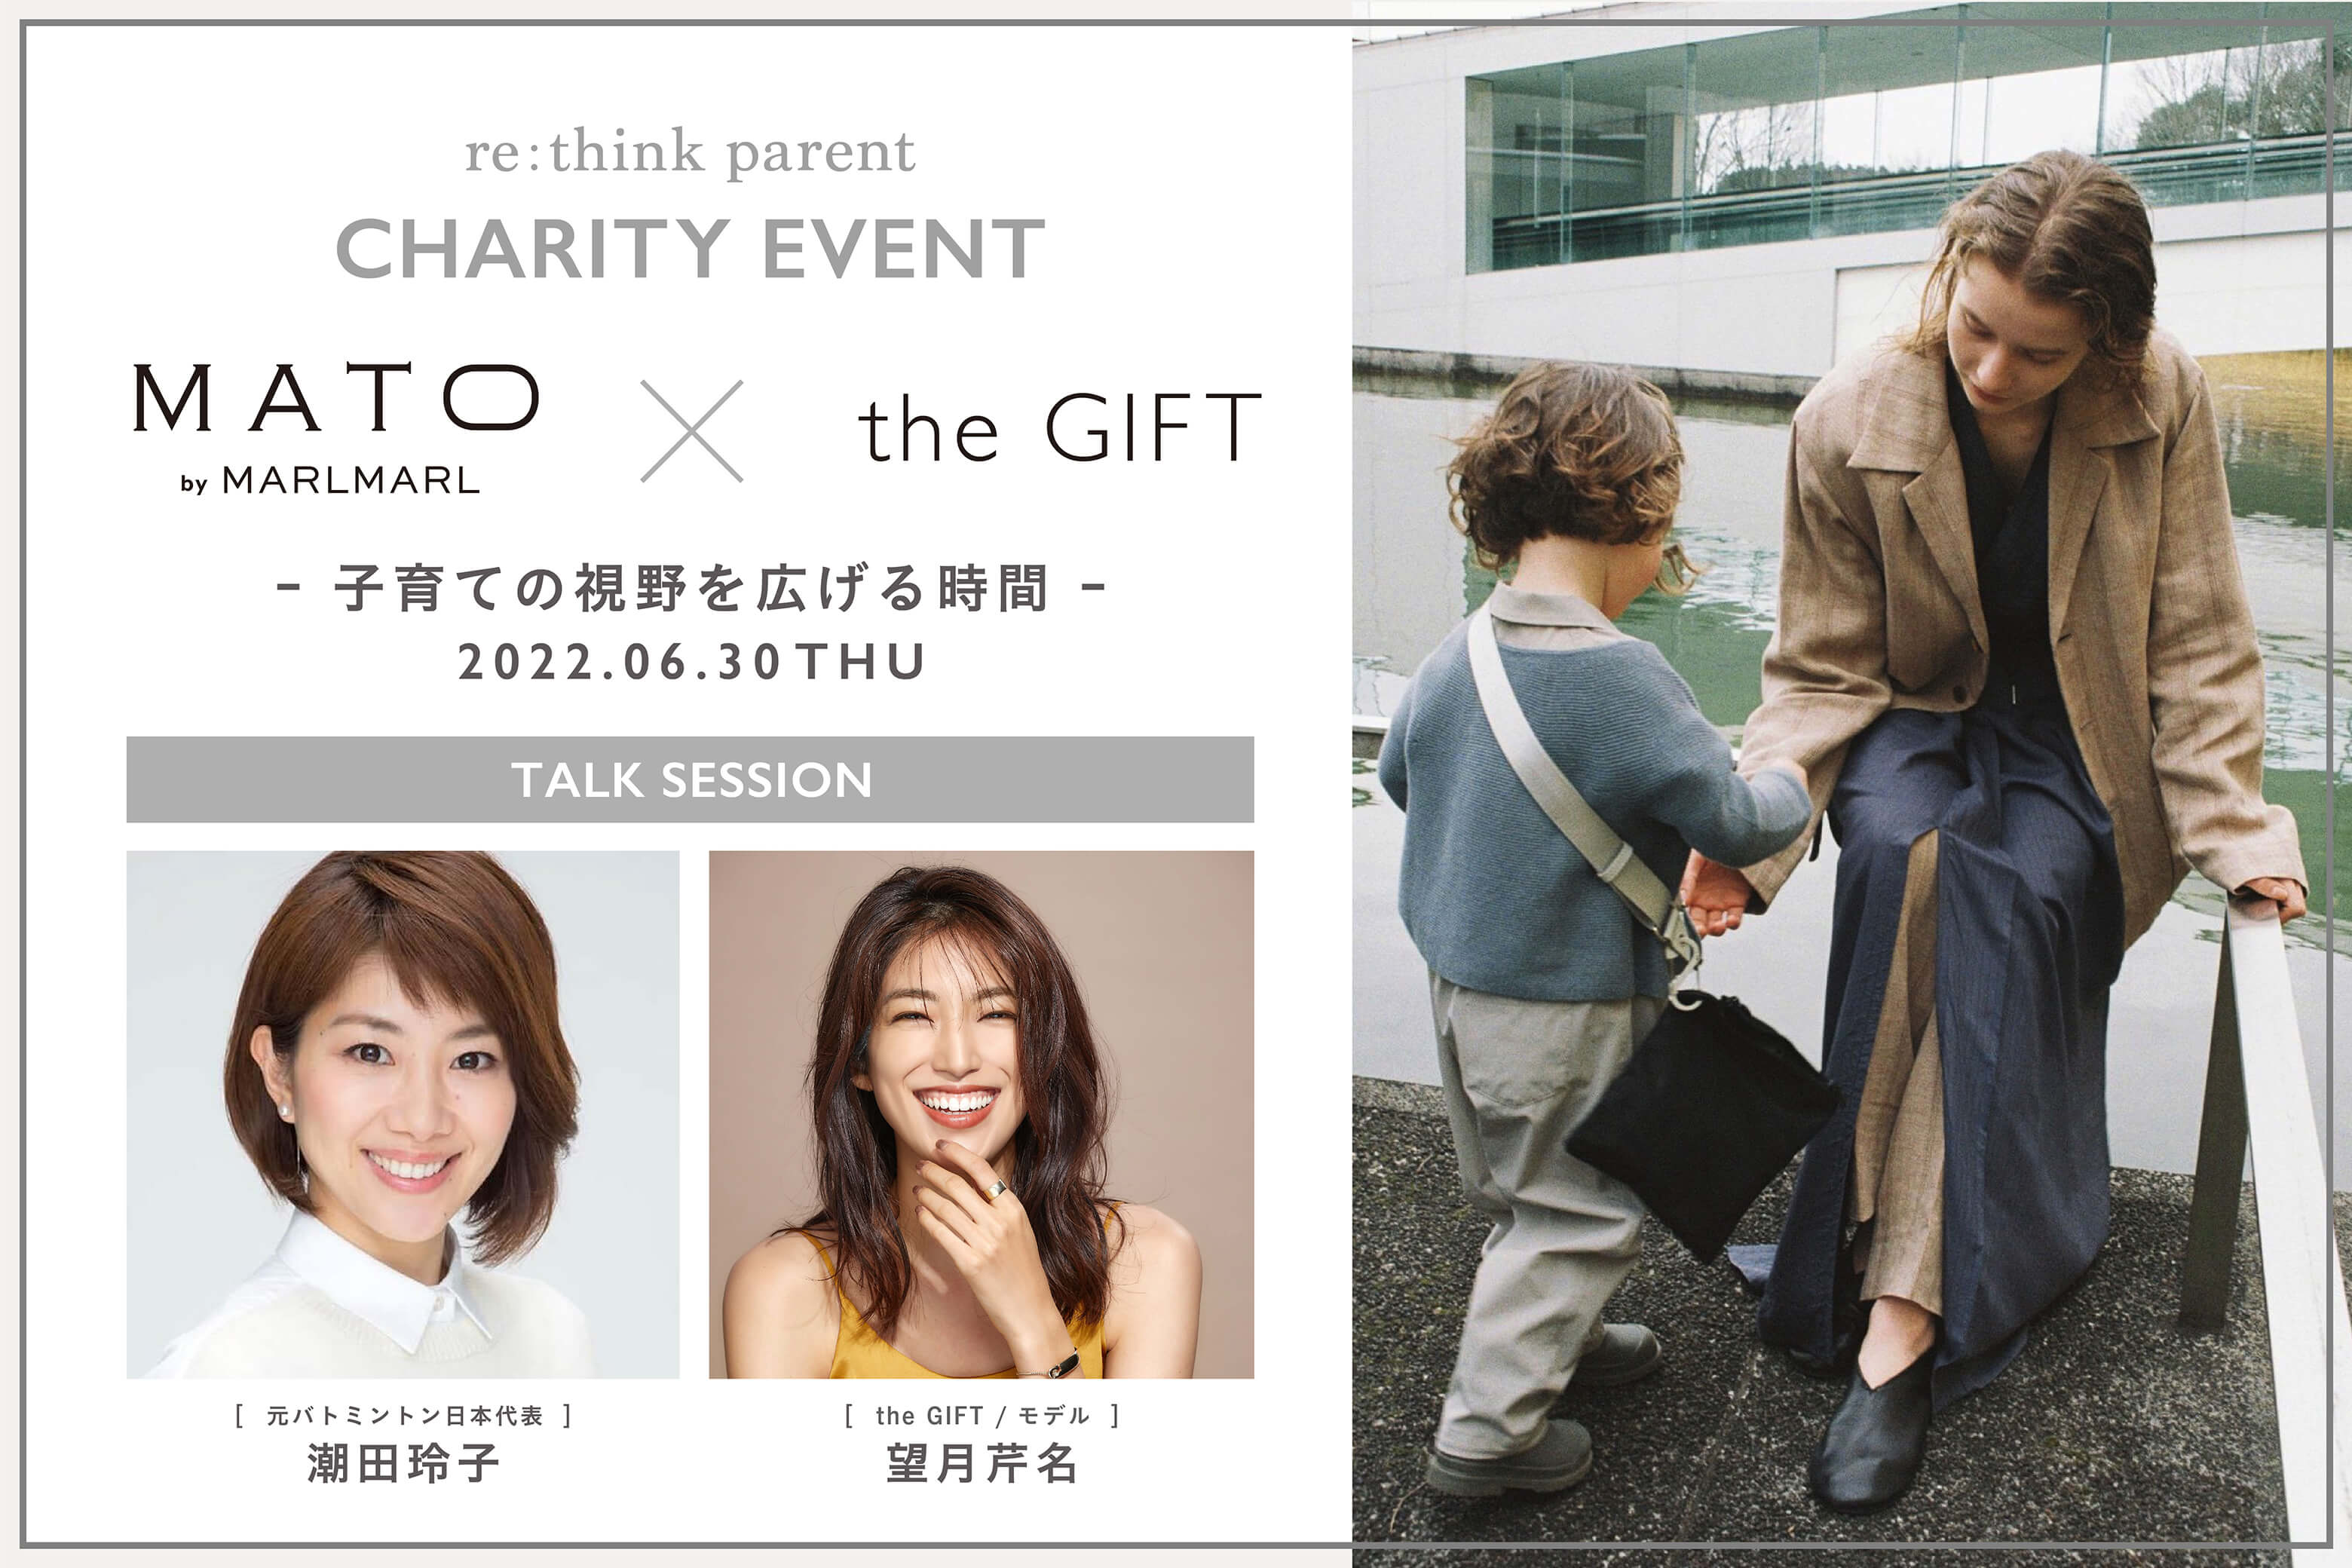 MATO by MARLMARL × the GIFT チャリティーイベント